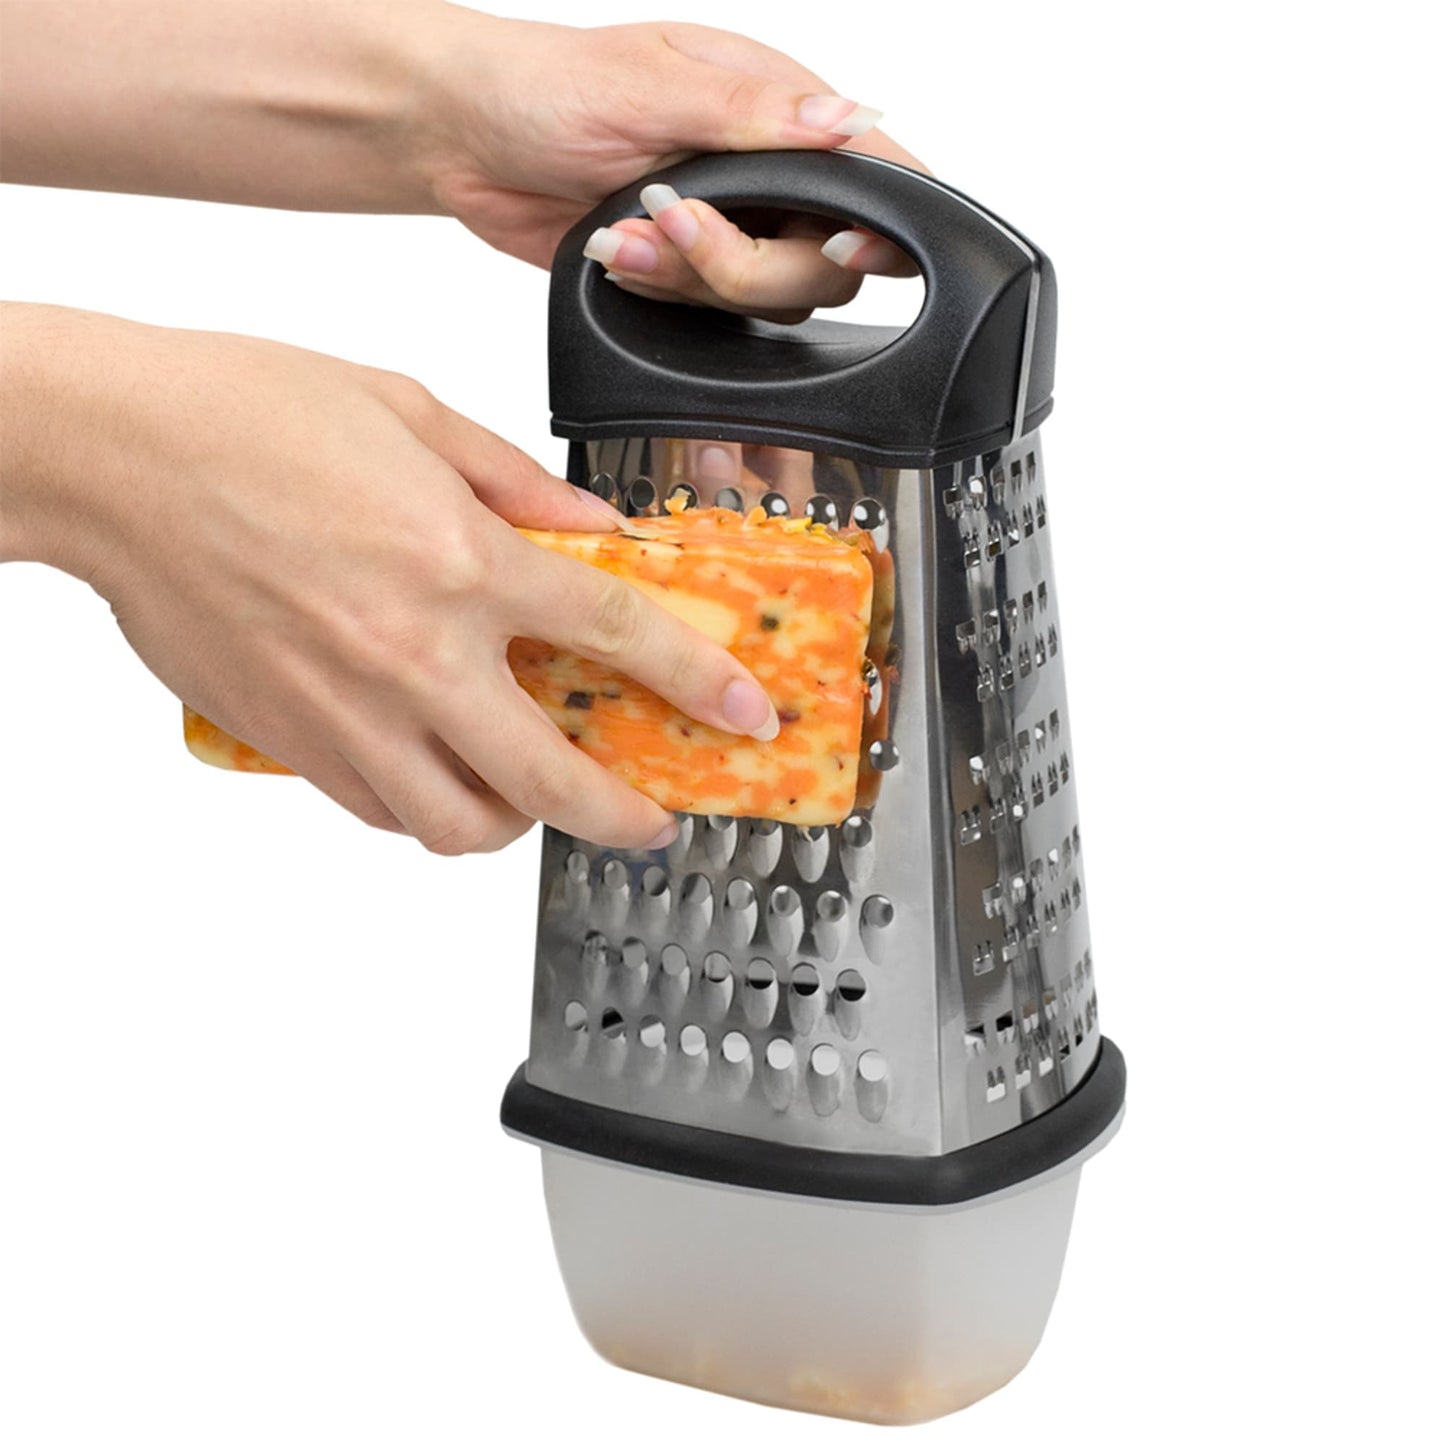 4 Sided Stainless Steel Cheese Grater with Storage Container